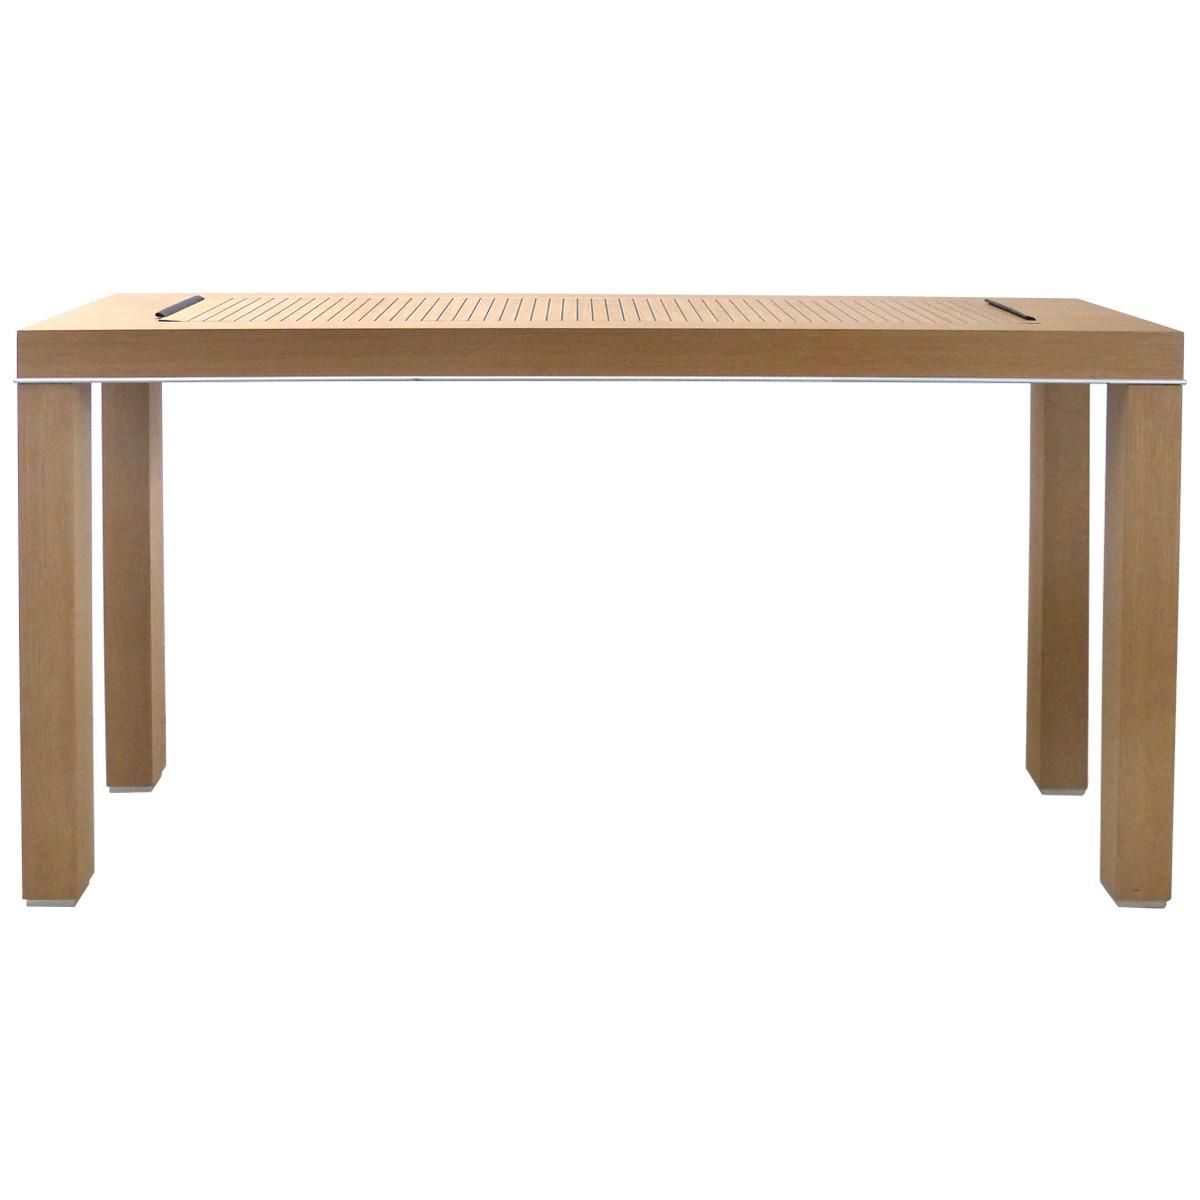 Minimalist Console Table Designedumberto Asnago For Mobilidea Pertaining To Era Limestone Console Tables (View 27 of 30)